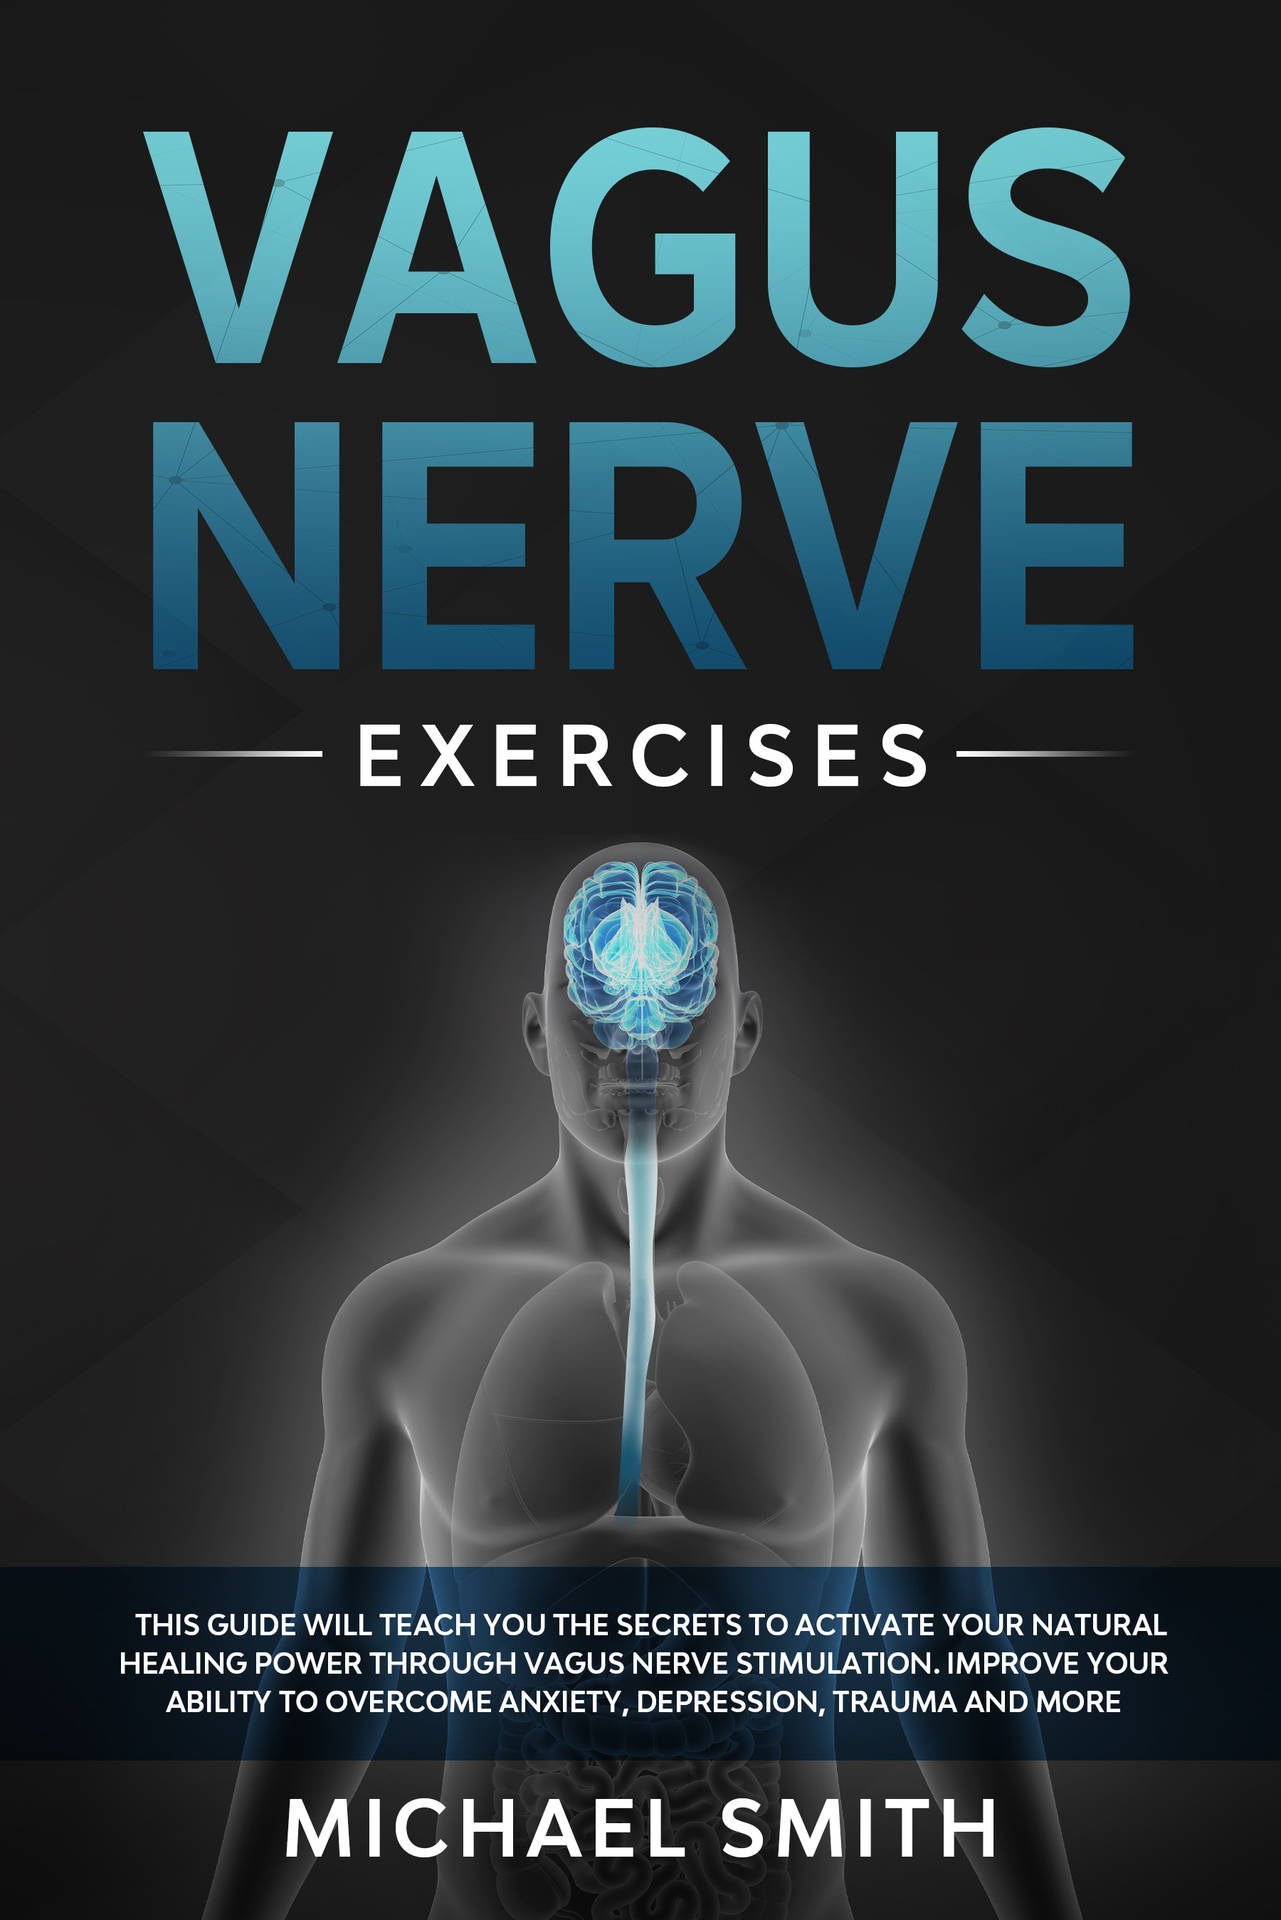 Vagus Nerve Exercises: This Guide Will Teach You the Secrets to Activate Your Natural Healing Power Through Vagus Nerve Stimulation.Improve Your Ability to Overcome Anxiety,Depression,Trauma and More